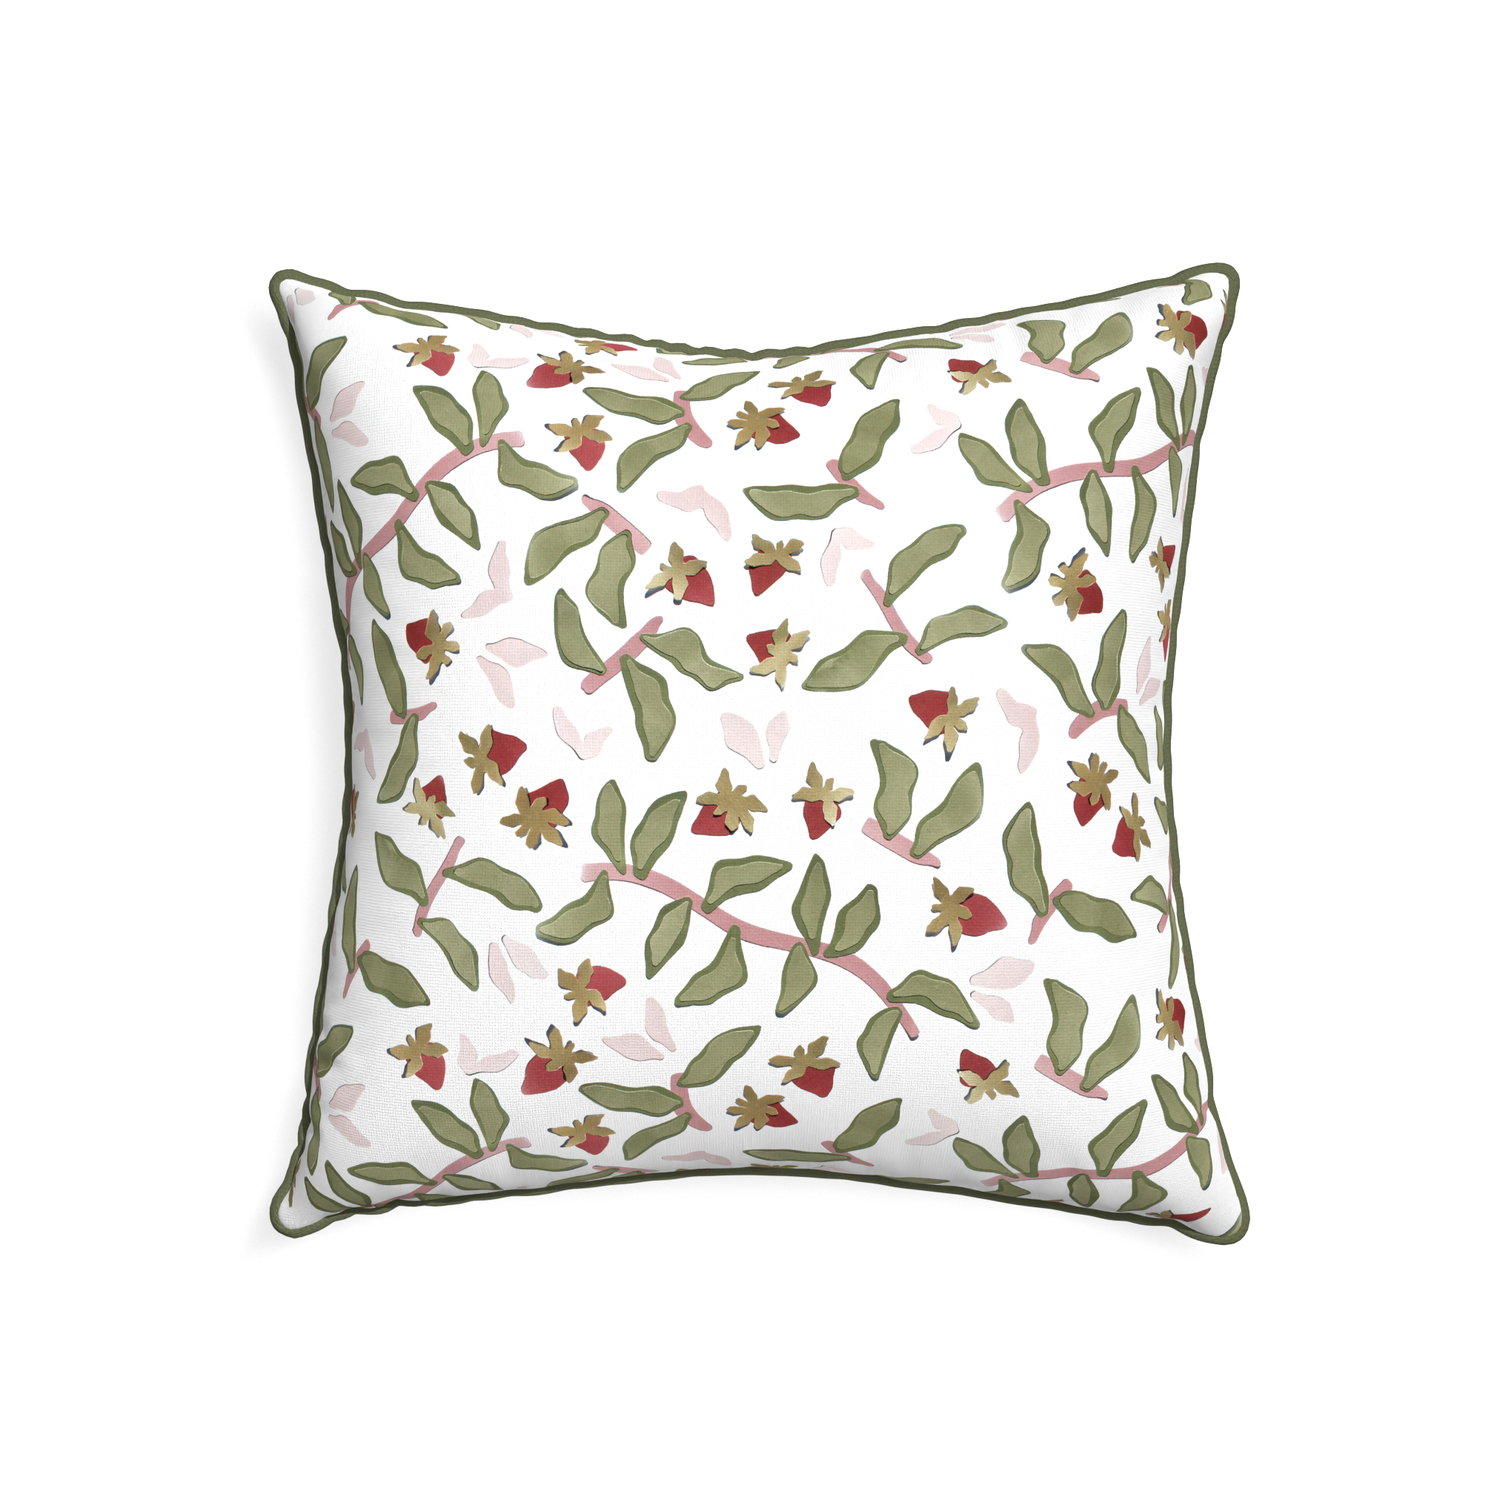 22-square nellie custom strawberry & botanicalpillow with f piping on white background